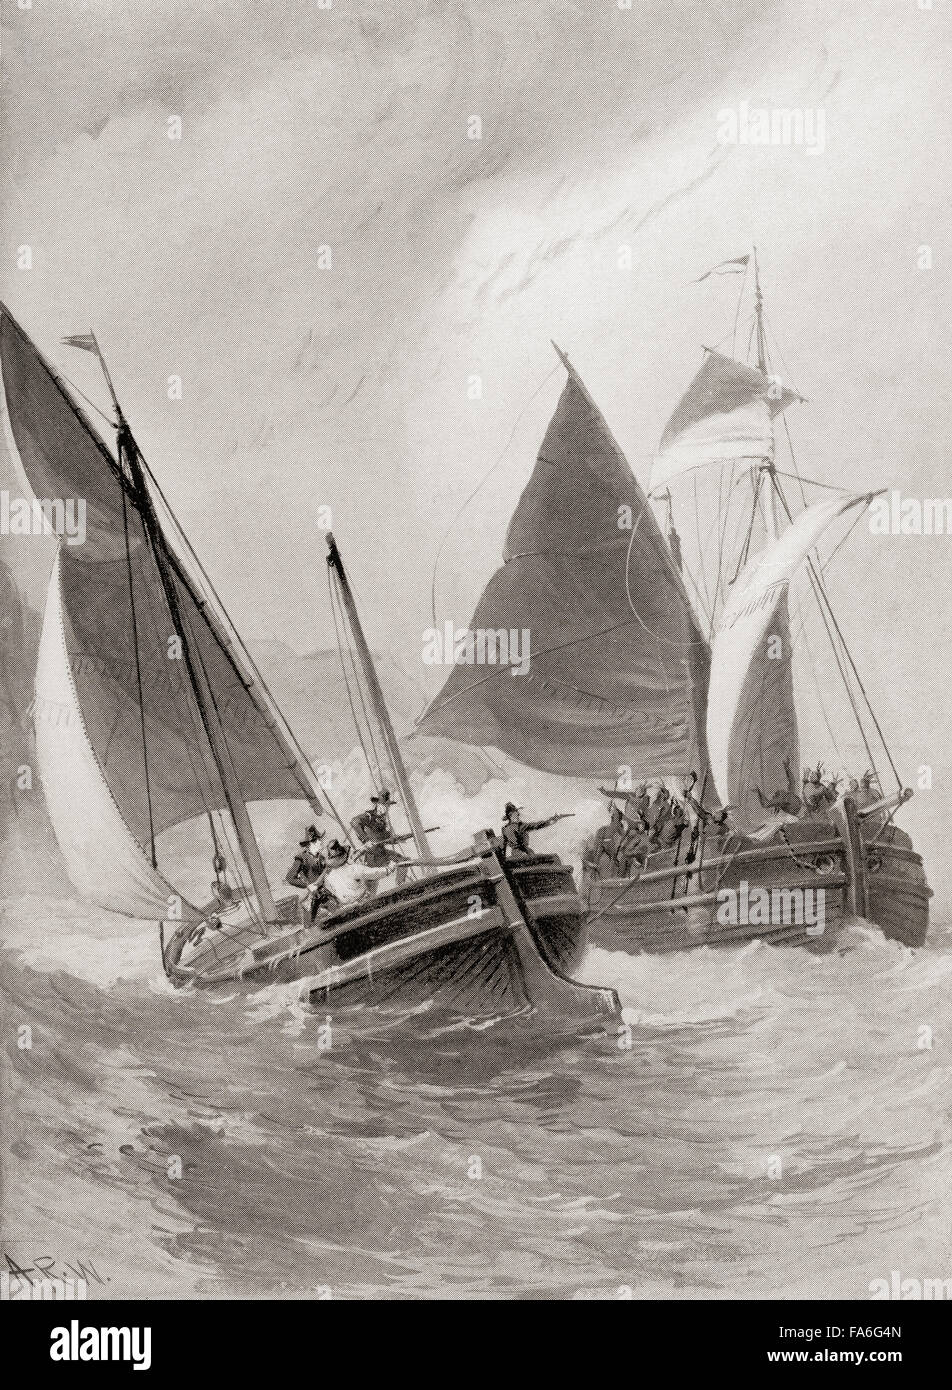 John Mason (c. 1600–1672) and John Gallop (1619-1675) attacking the Indians off Block Island during the Pequot War in 1637. Stock Photo